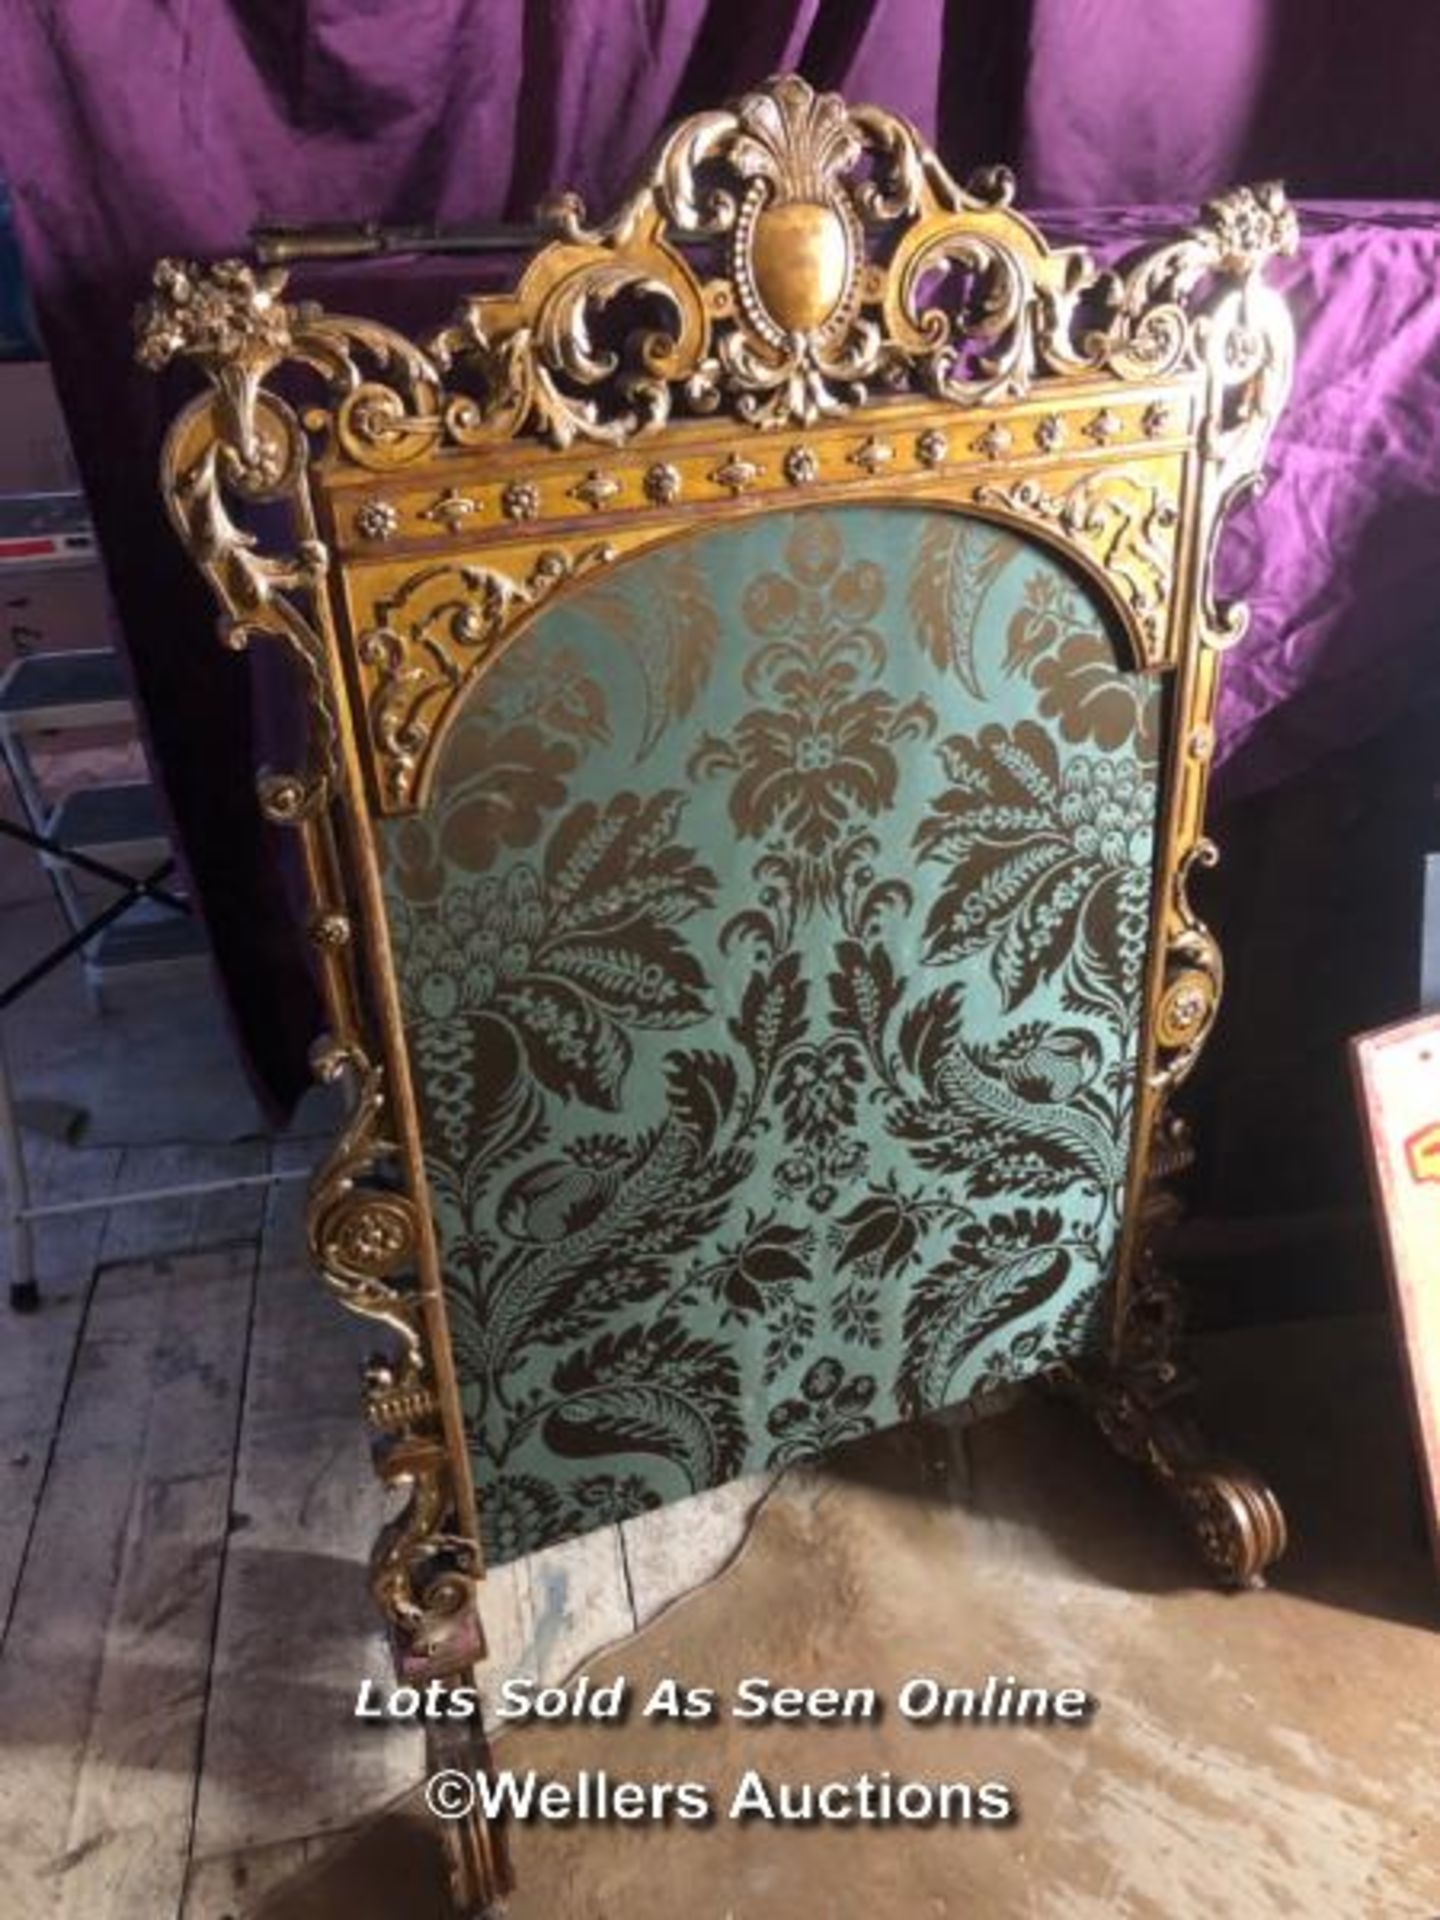 LARGE AND IMPRESSIVE FIRE SCREEN, ITALIAN ORIGIN, WITH EXTENSIVE CARVING AND GILDING, 88 X 40 X - Image 4 of 9